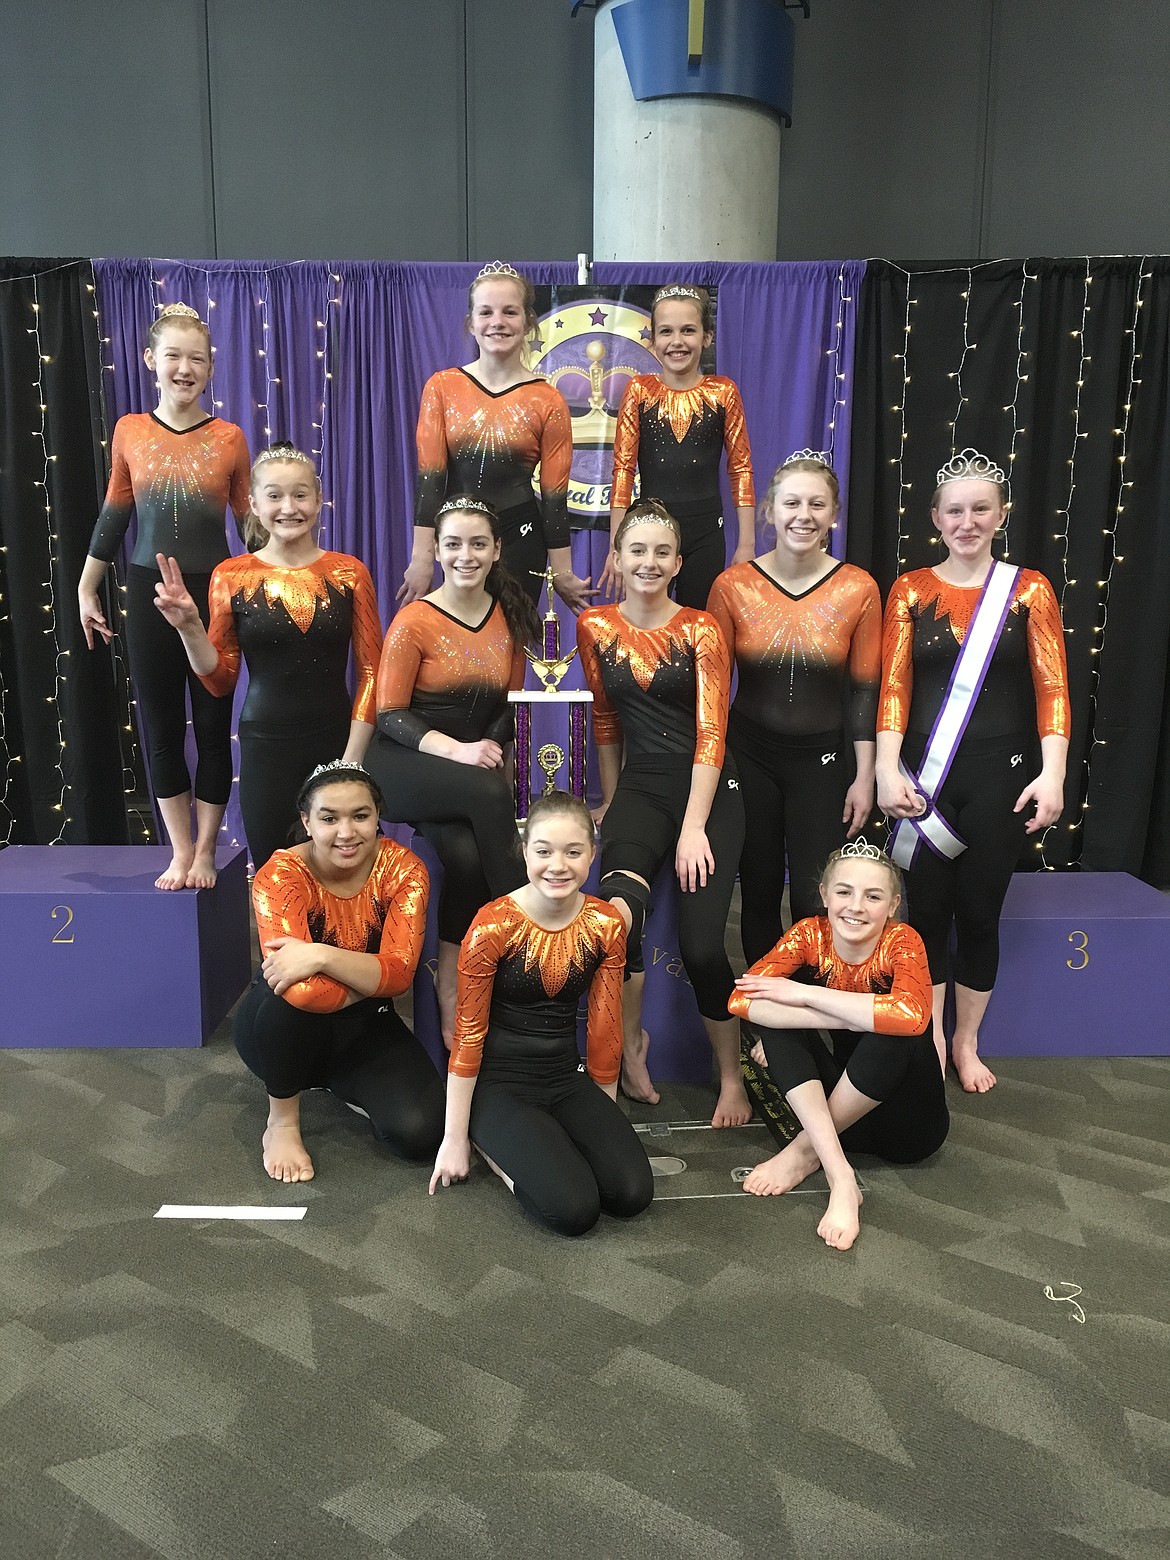 Courtesy photo
North Idaho Gymnastics Xcel Silvers took first place team at the Royal Festival at the Spokane Convention Center March 6-7. In the front row from left are Shariece Vandever, Lexi Screibeis and Dani Chance; second row from left, Charlee Friddle, Jonni Sanborn, Makenna Hillman, Madalyn Day and Lynzey Davis; and back row from left, Shelby Adkison, Macie Uhlenkott and Ella Johnson.